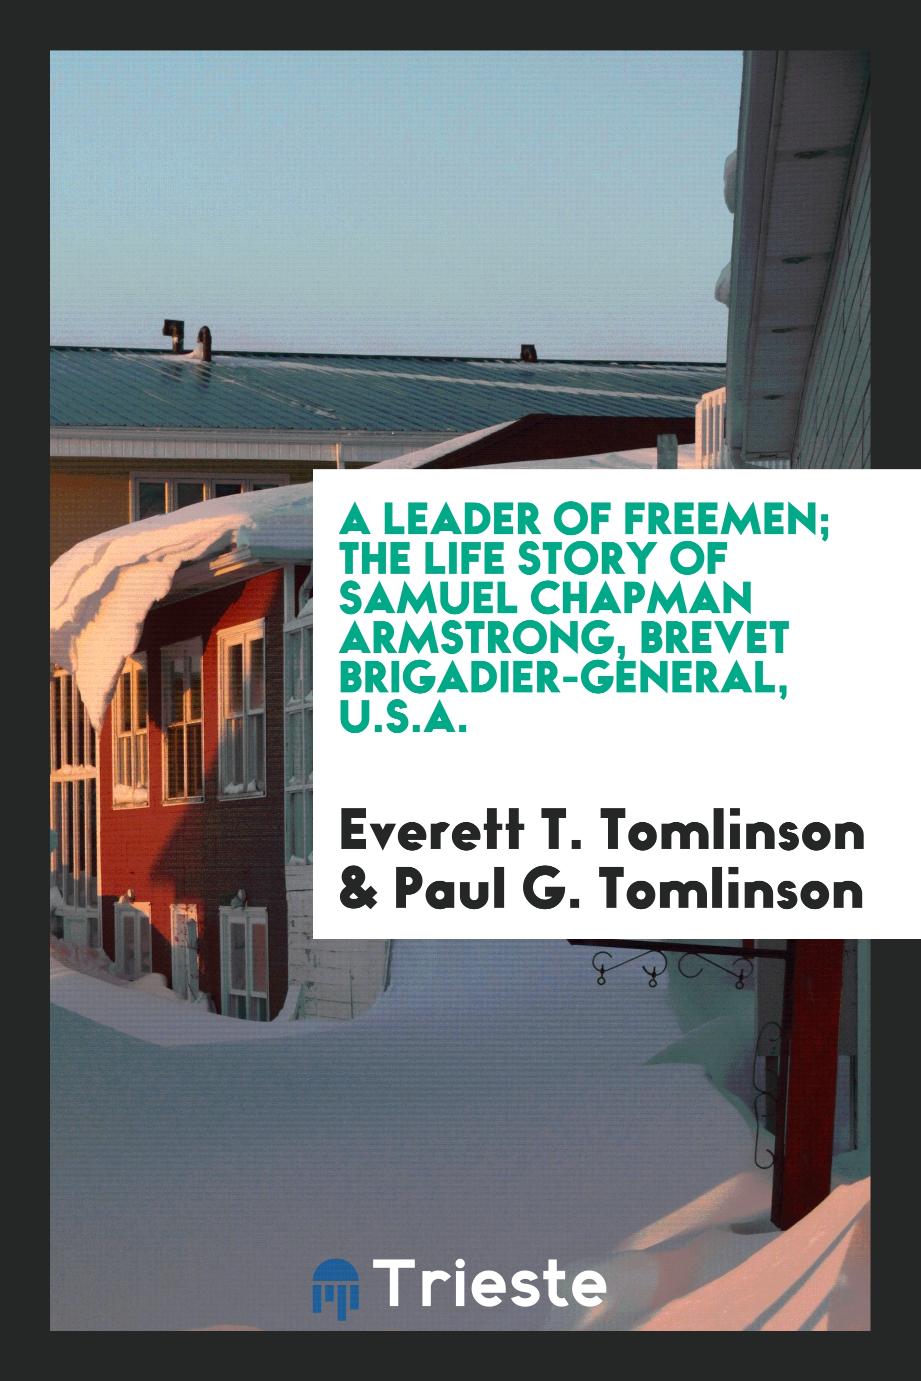 A leader of freemen; the life story of Samuel Chapman Armstrong, brevet brigadier-general, U.S.A.